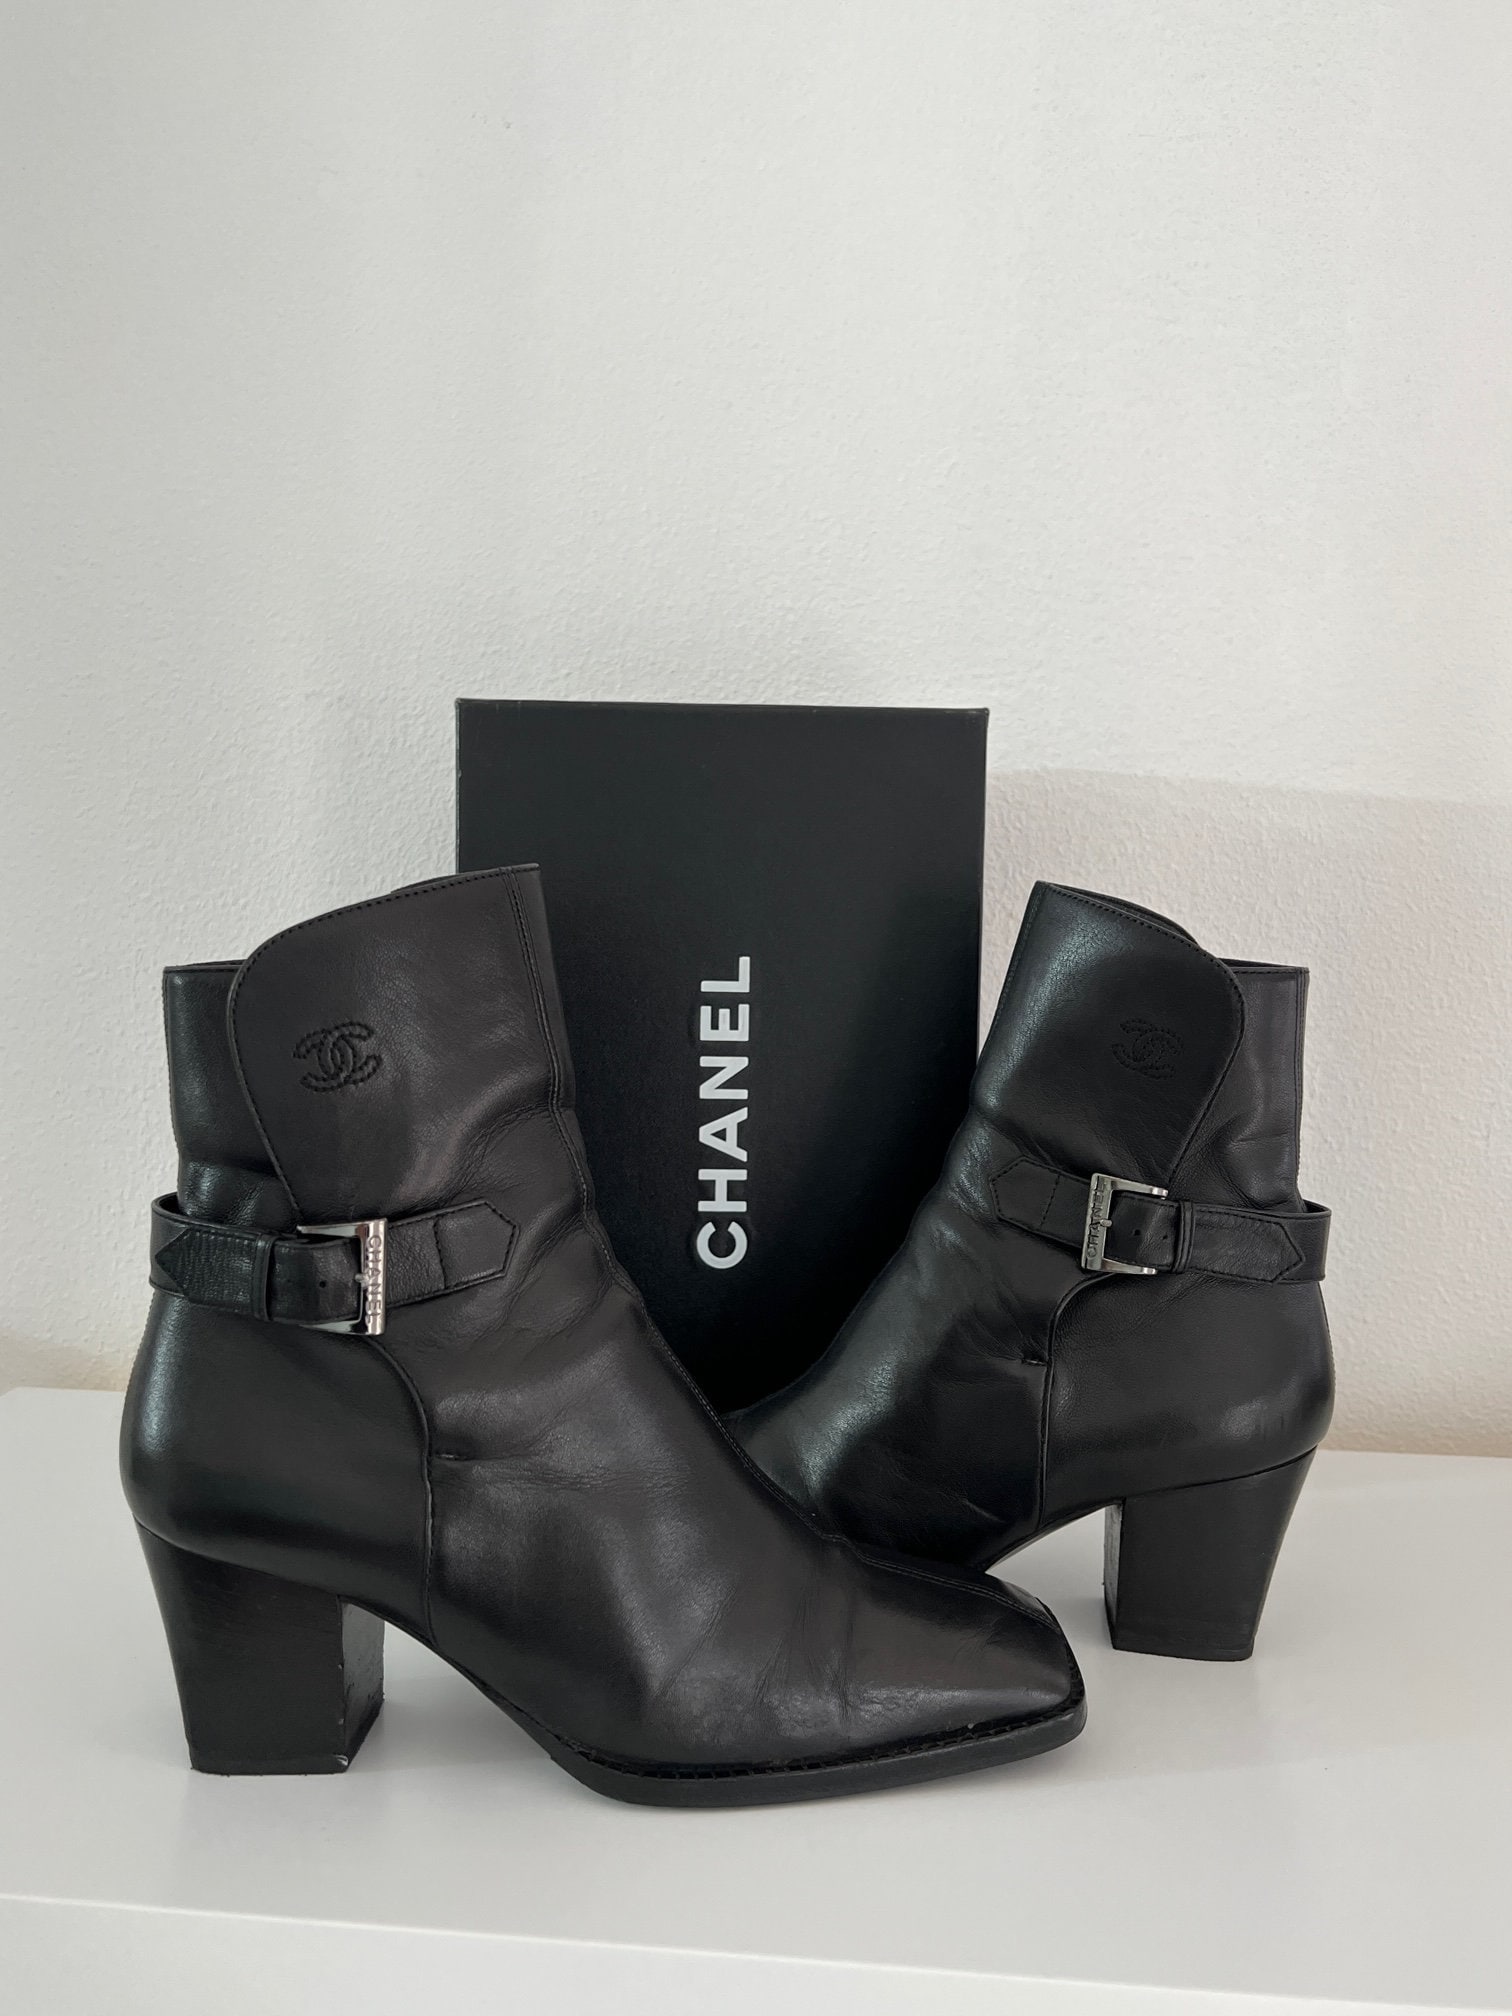 Chanel Boots -  Norway